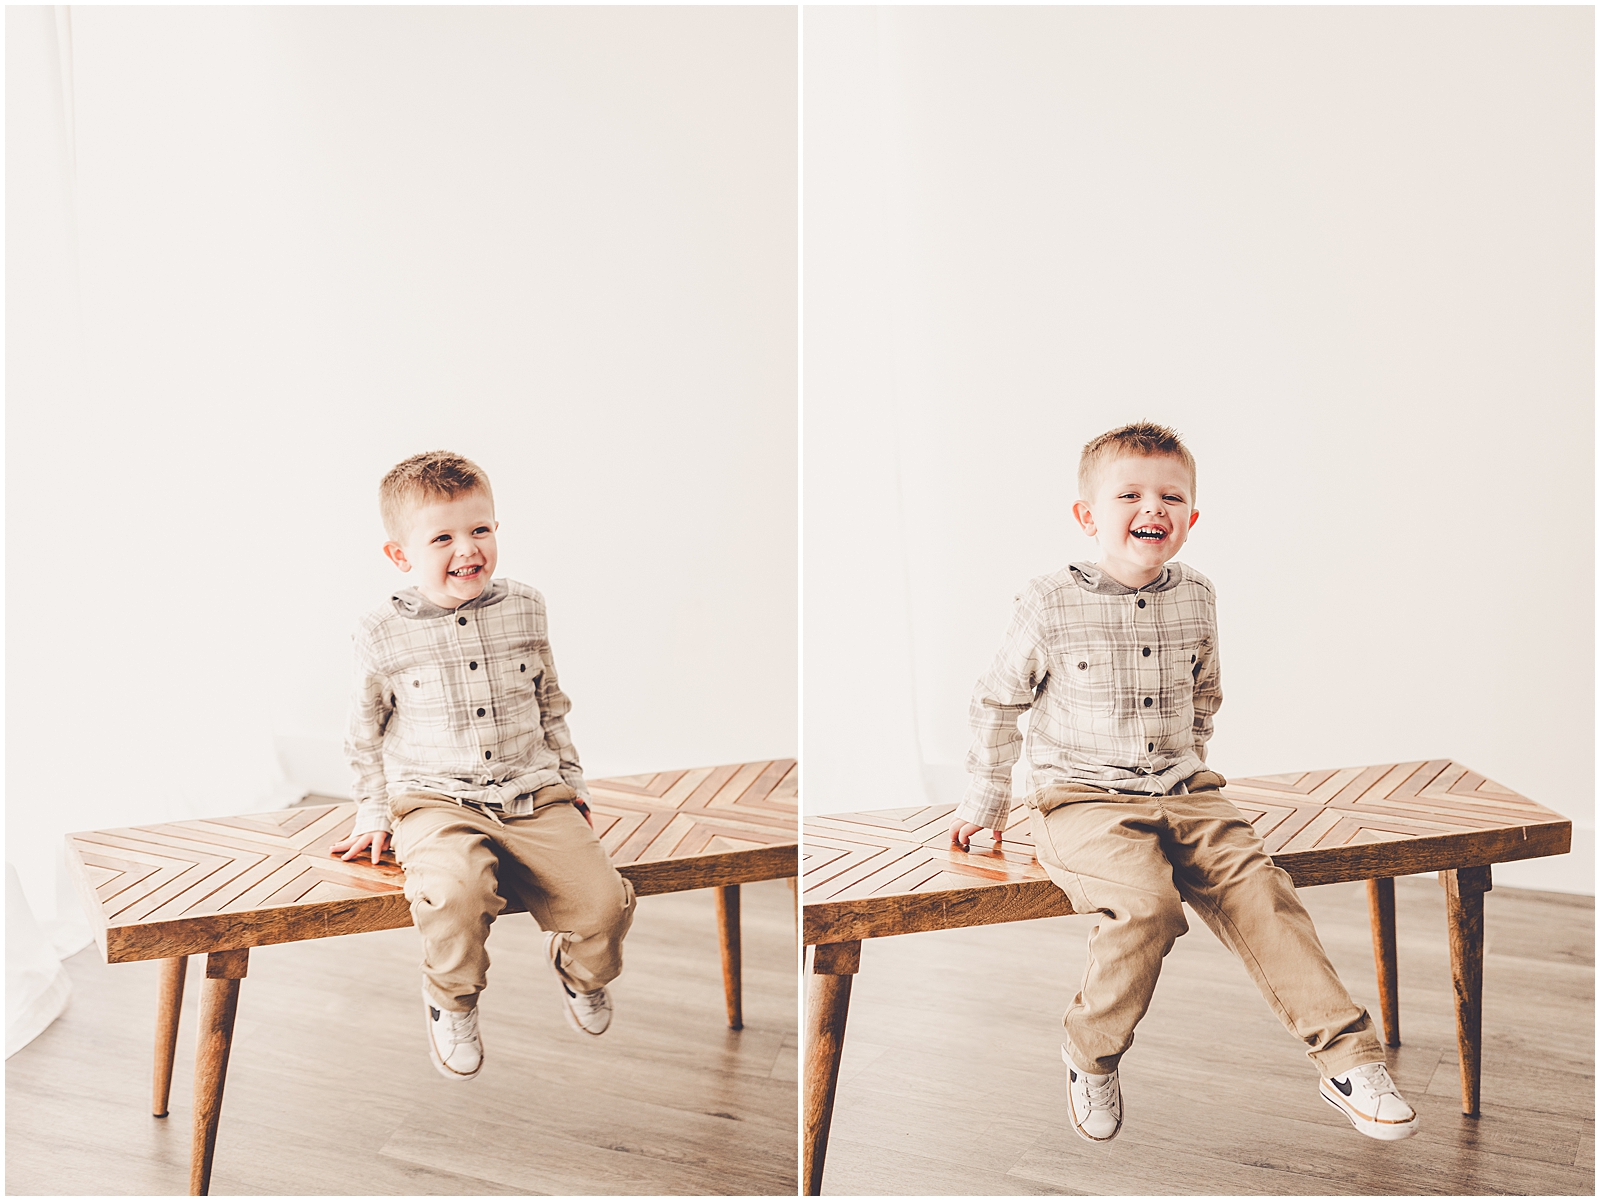 Natural light studio family session for the Cheever family with Kankakee family photographer Kara Evans Photographer.